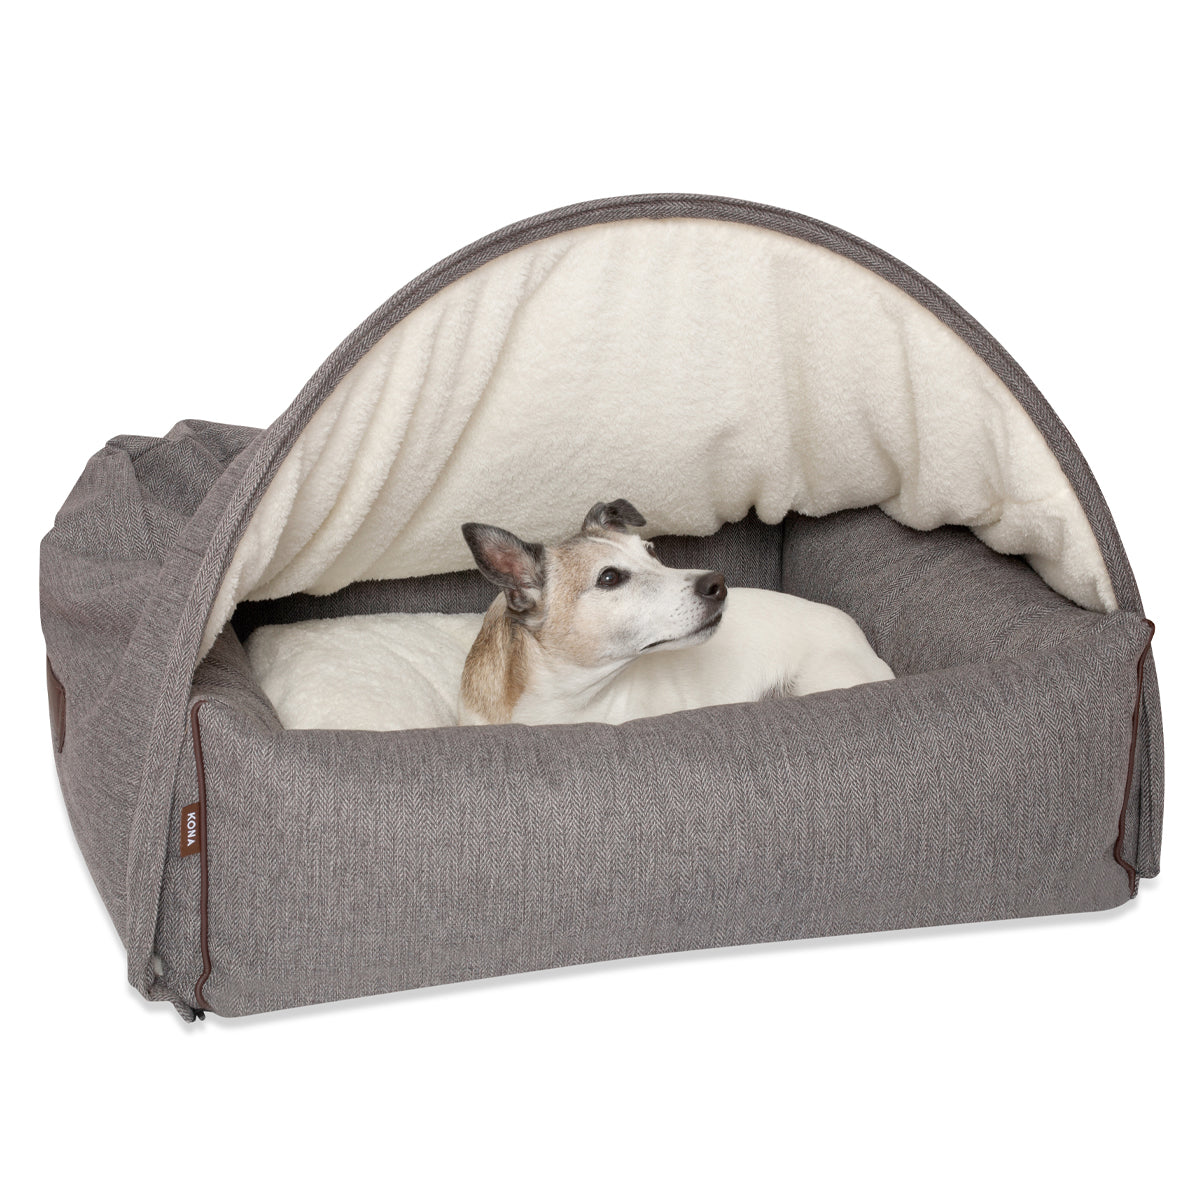 KONA CAVE® Jack Russell Terrier sitting in a big Snuggle Cave Bed by KONA CAVE®. Luxury hooded doggy den lined with super soft sherpa fleece. 